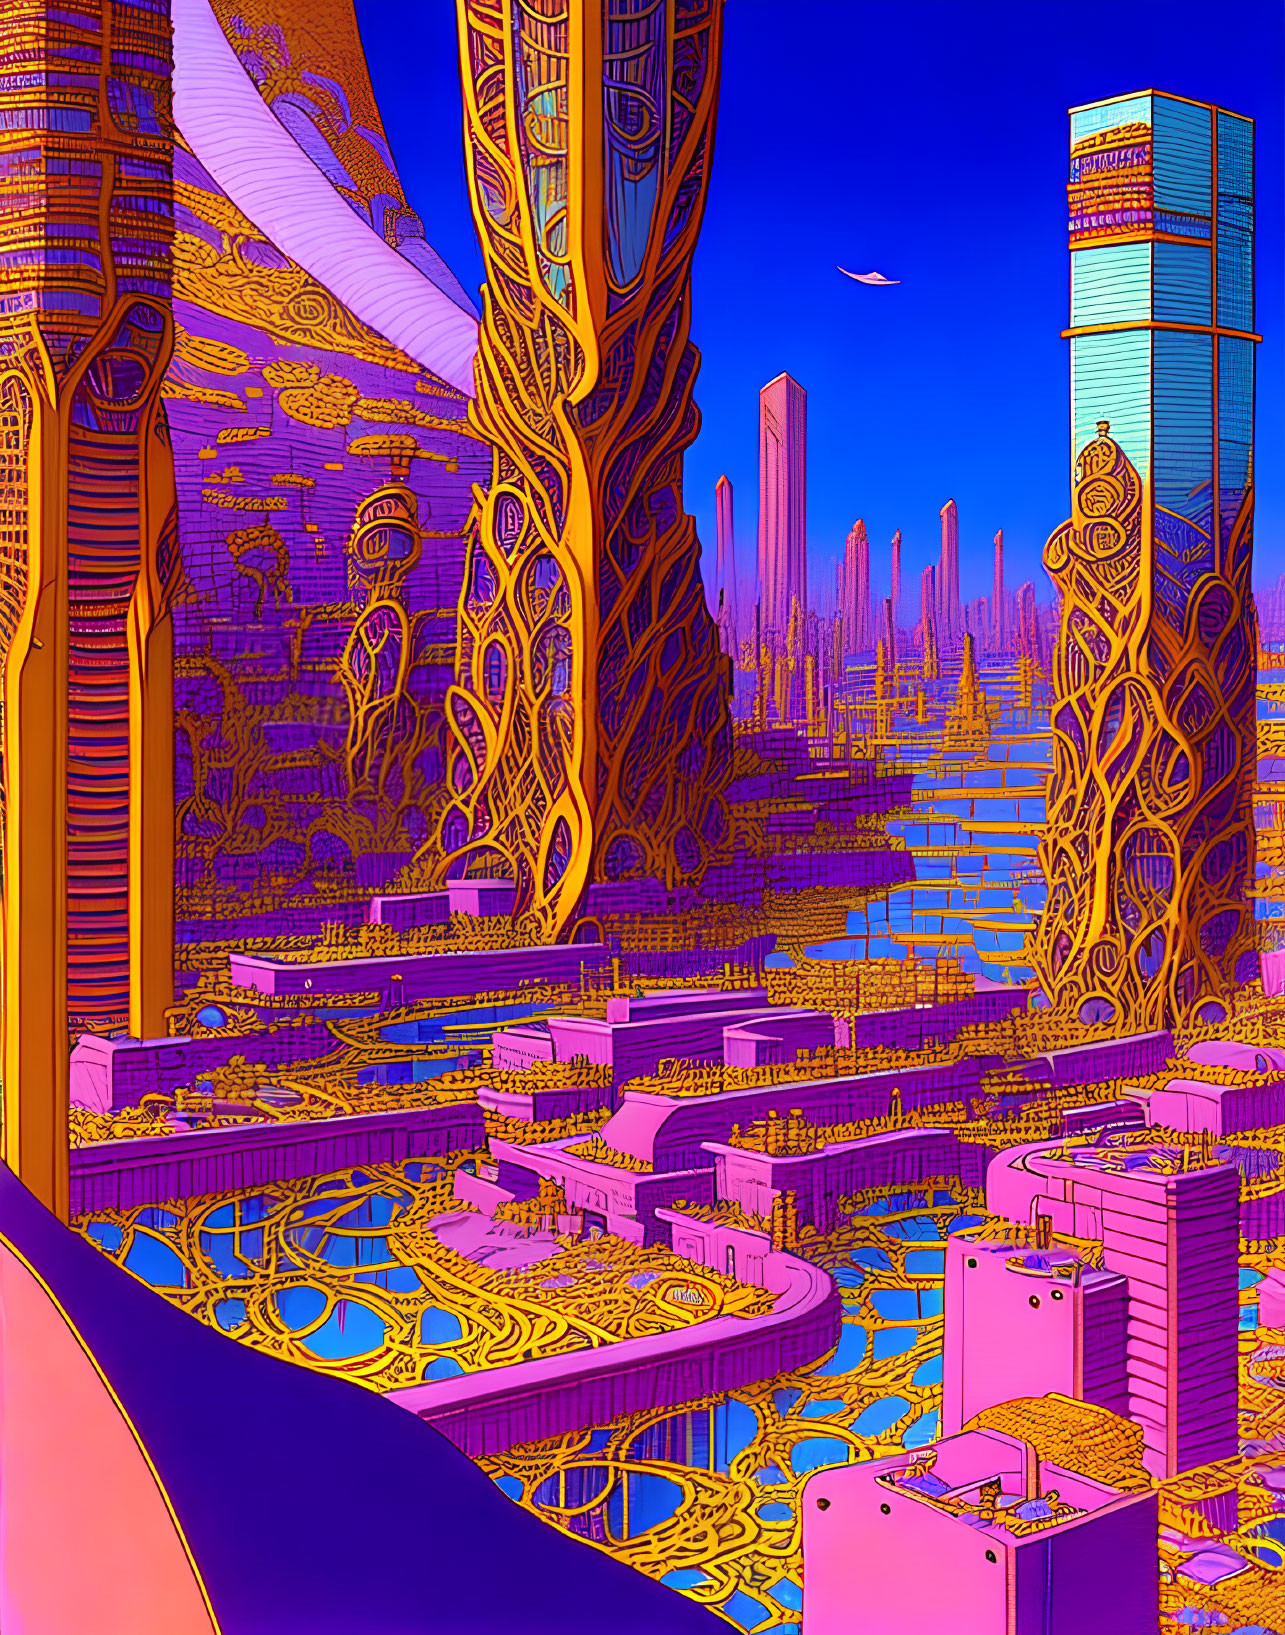 Futuristic cityscape with golden structures and skyscrapers